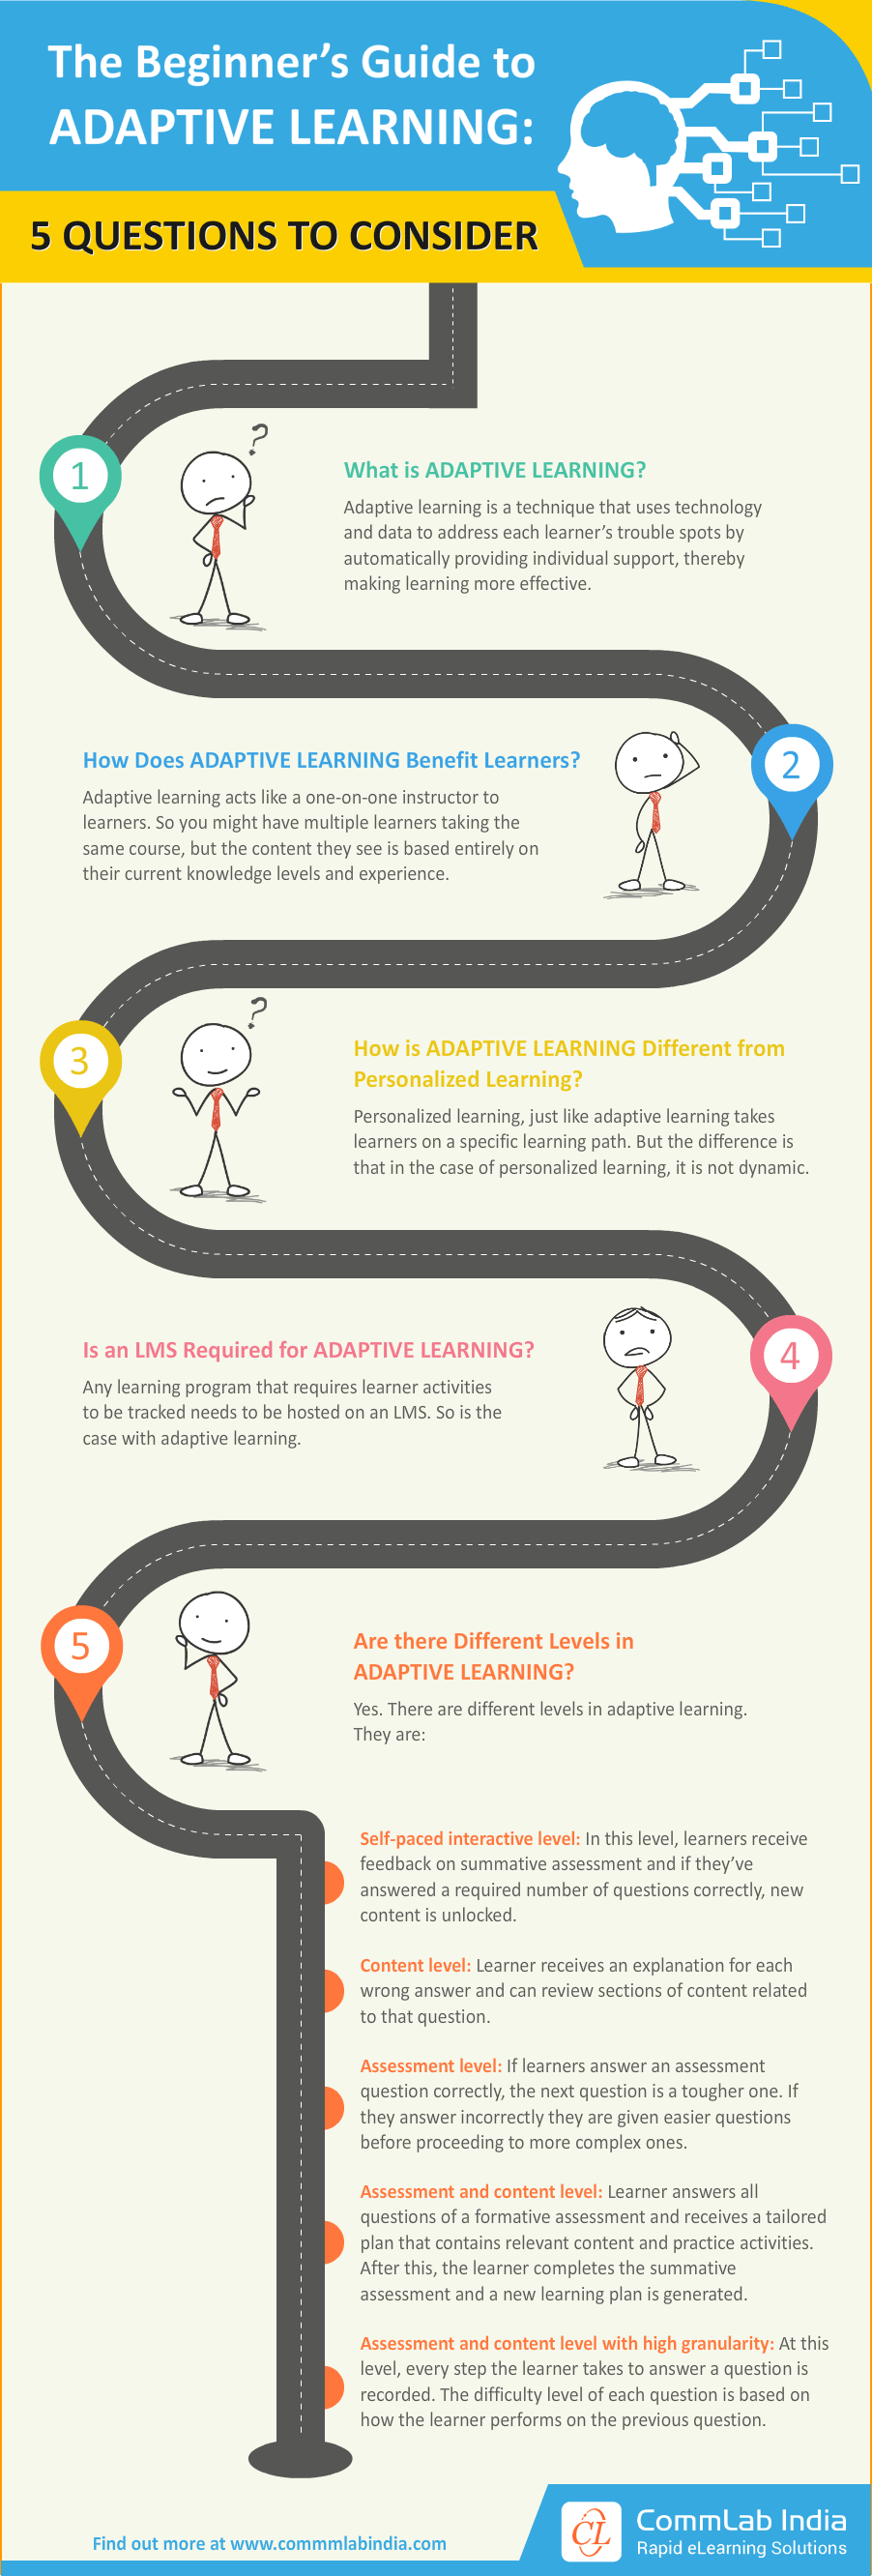 The Beginner’s Guide to Adaptive Learning: 5 Questions to Consider [Infographic]